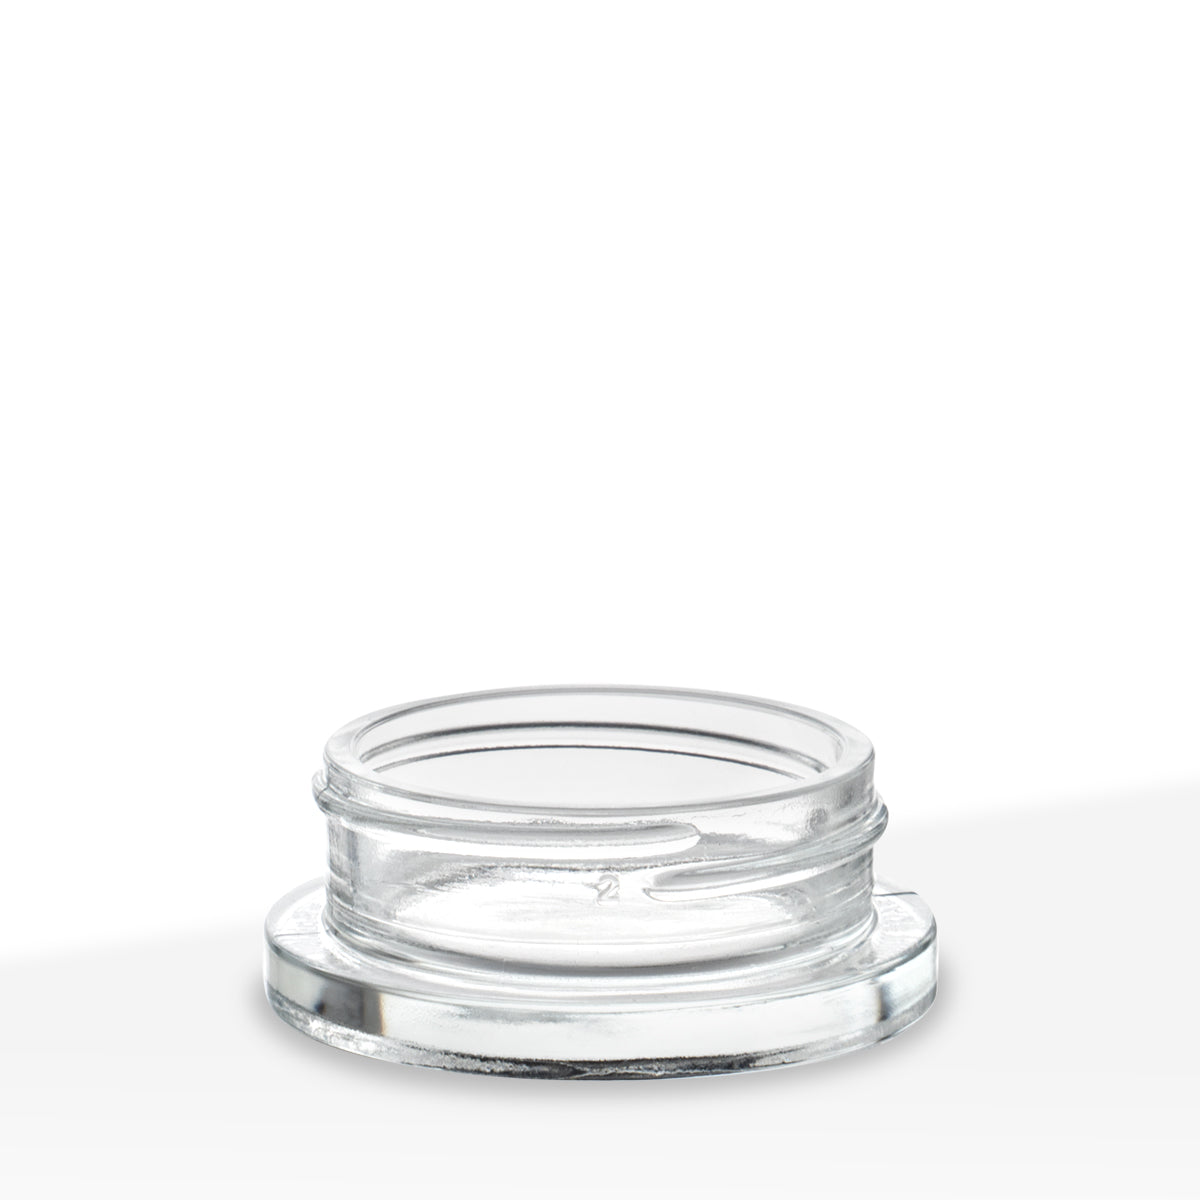 Concentrate Container | Thick Glass Jar | 53mm - 15mL - 60 Count